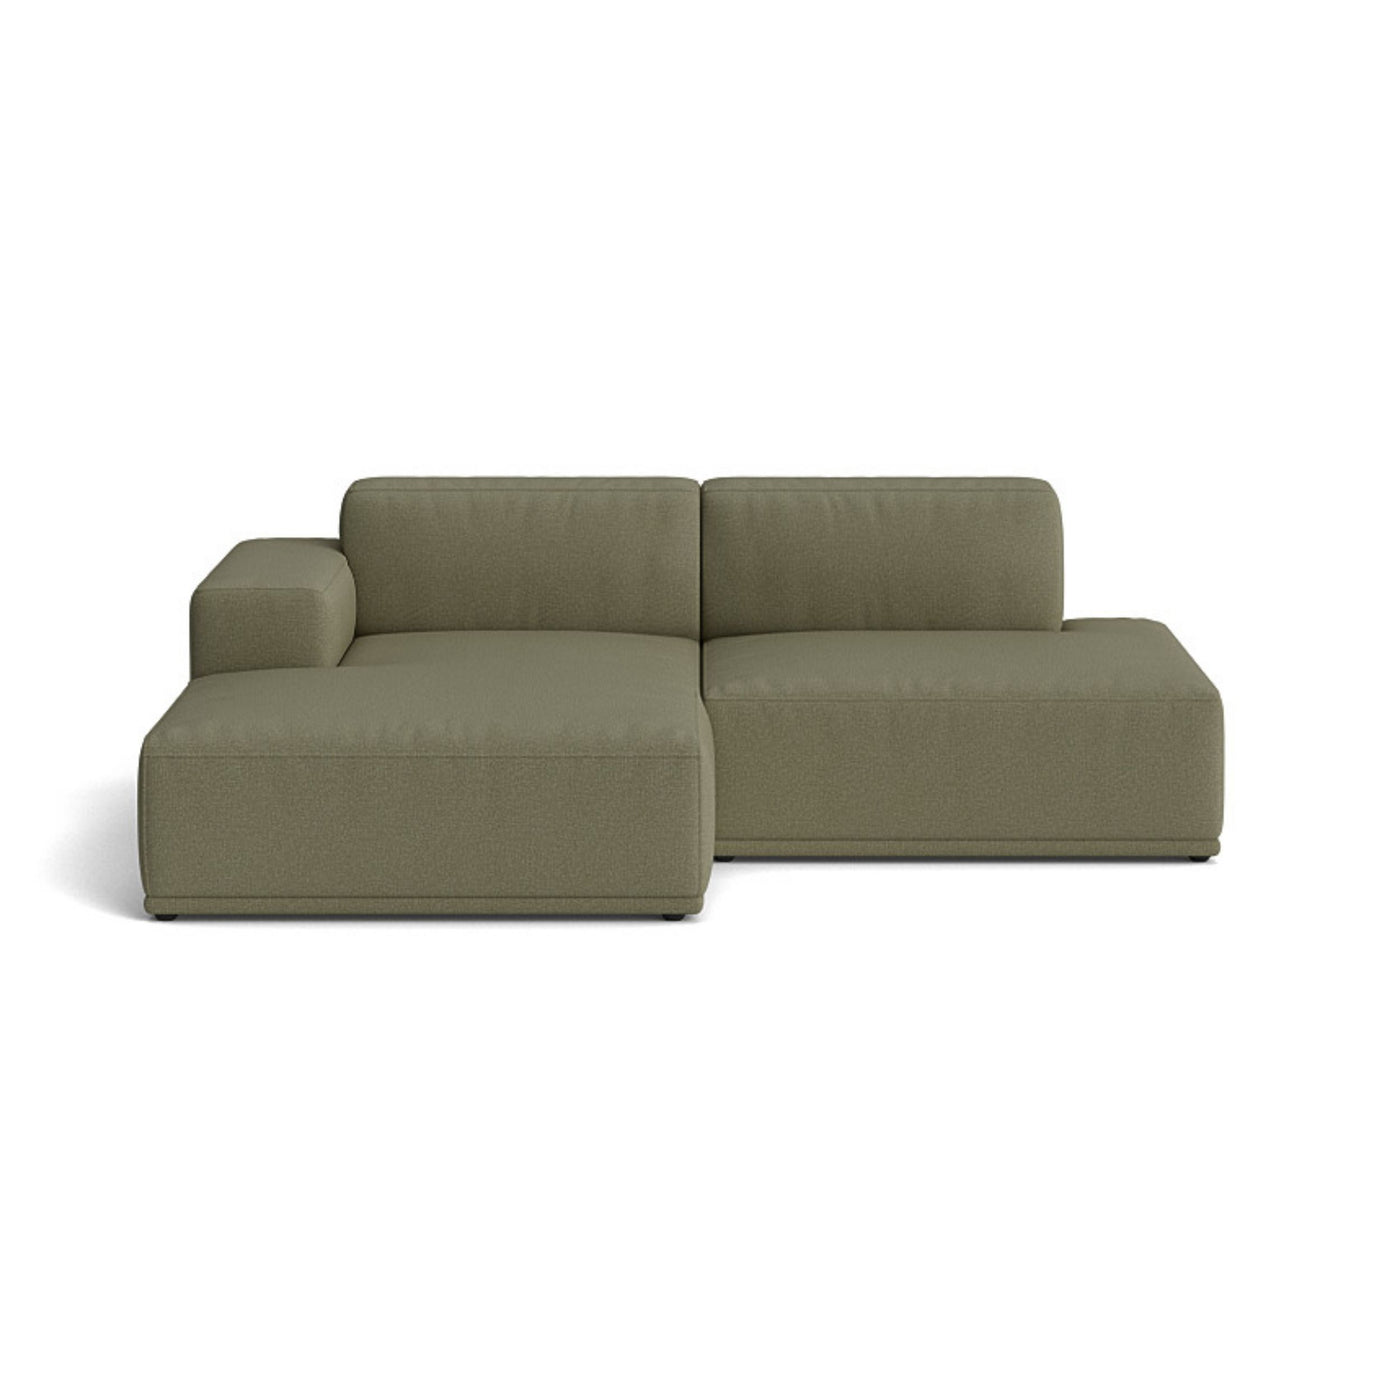 Muuto Connect Soft Modular 2 Seater Sofa, configuration 3. made-to-order from someday designs. #colour_clay-17